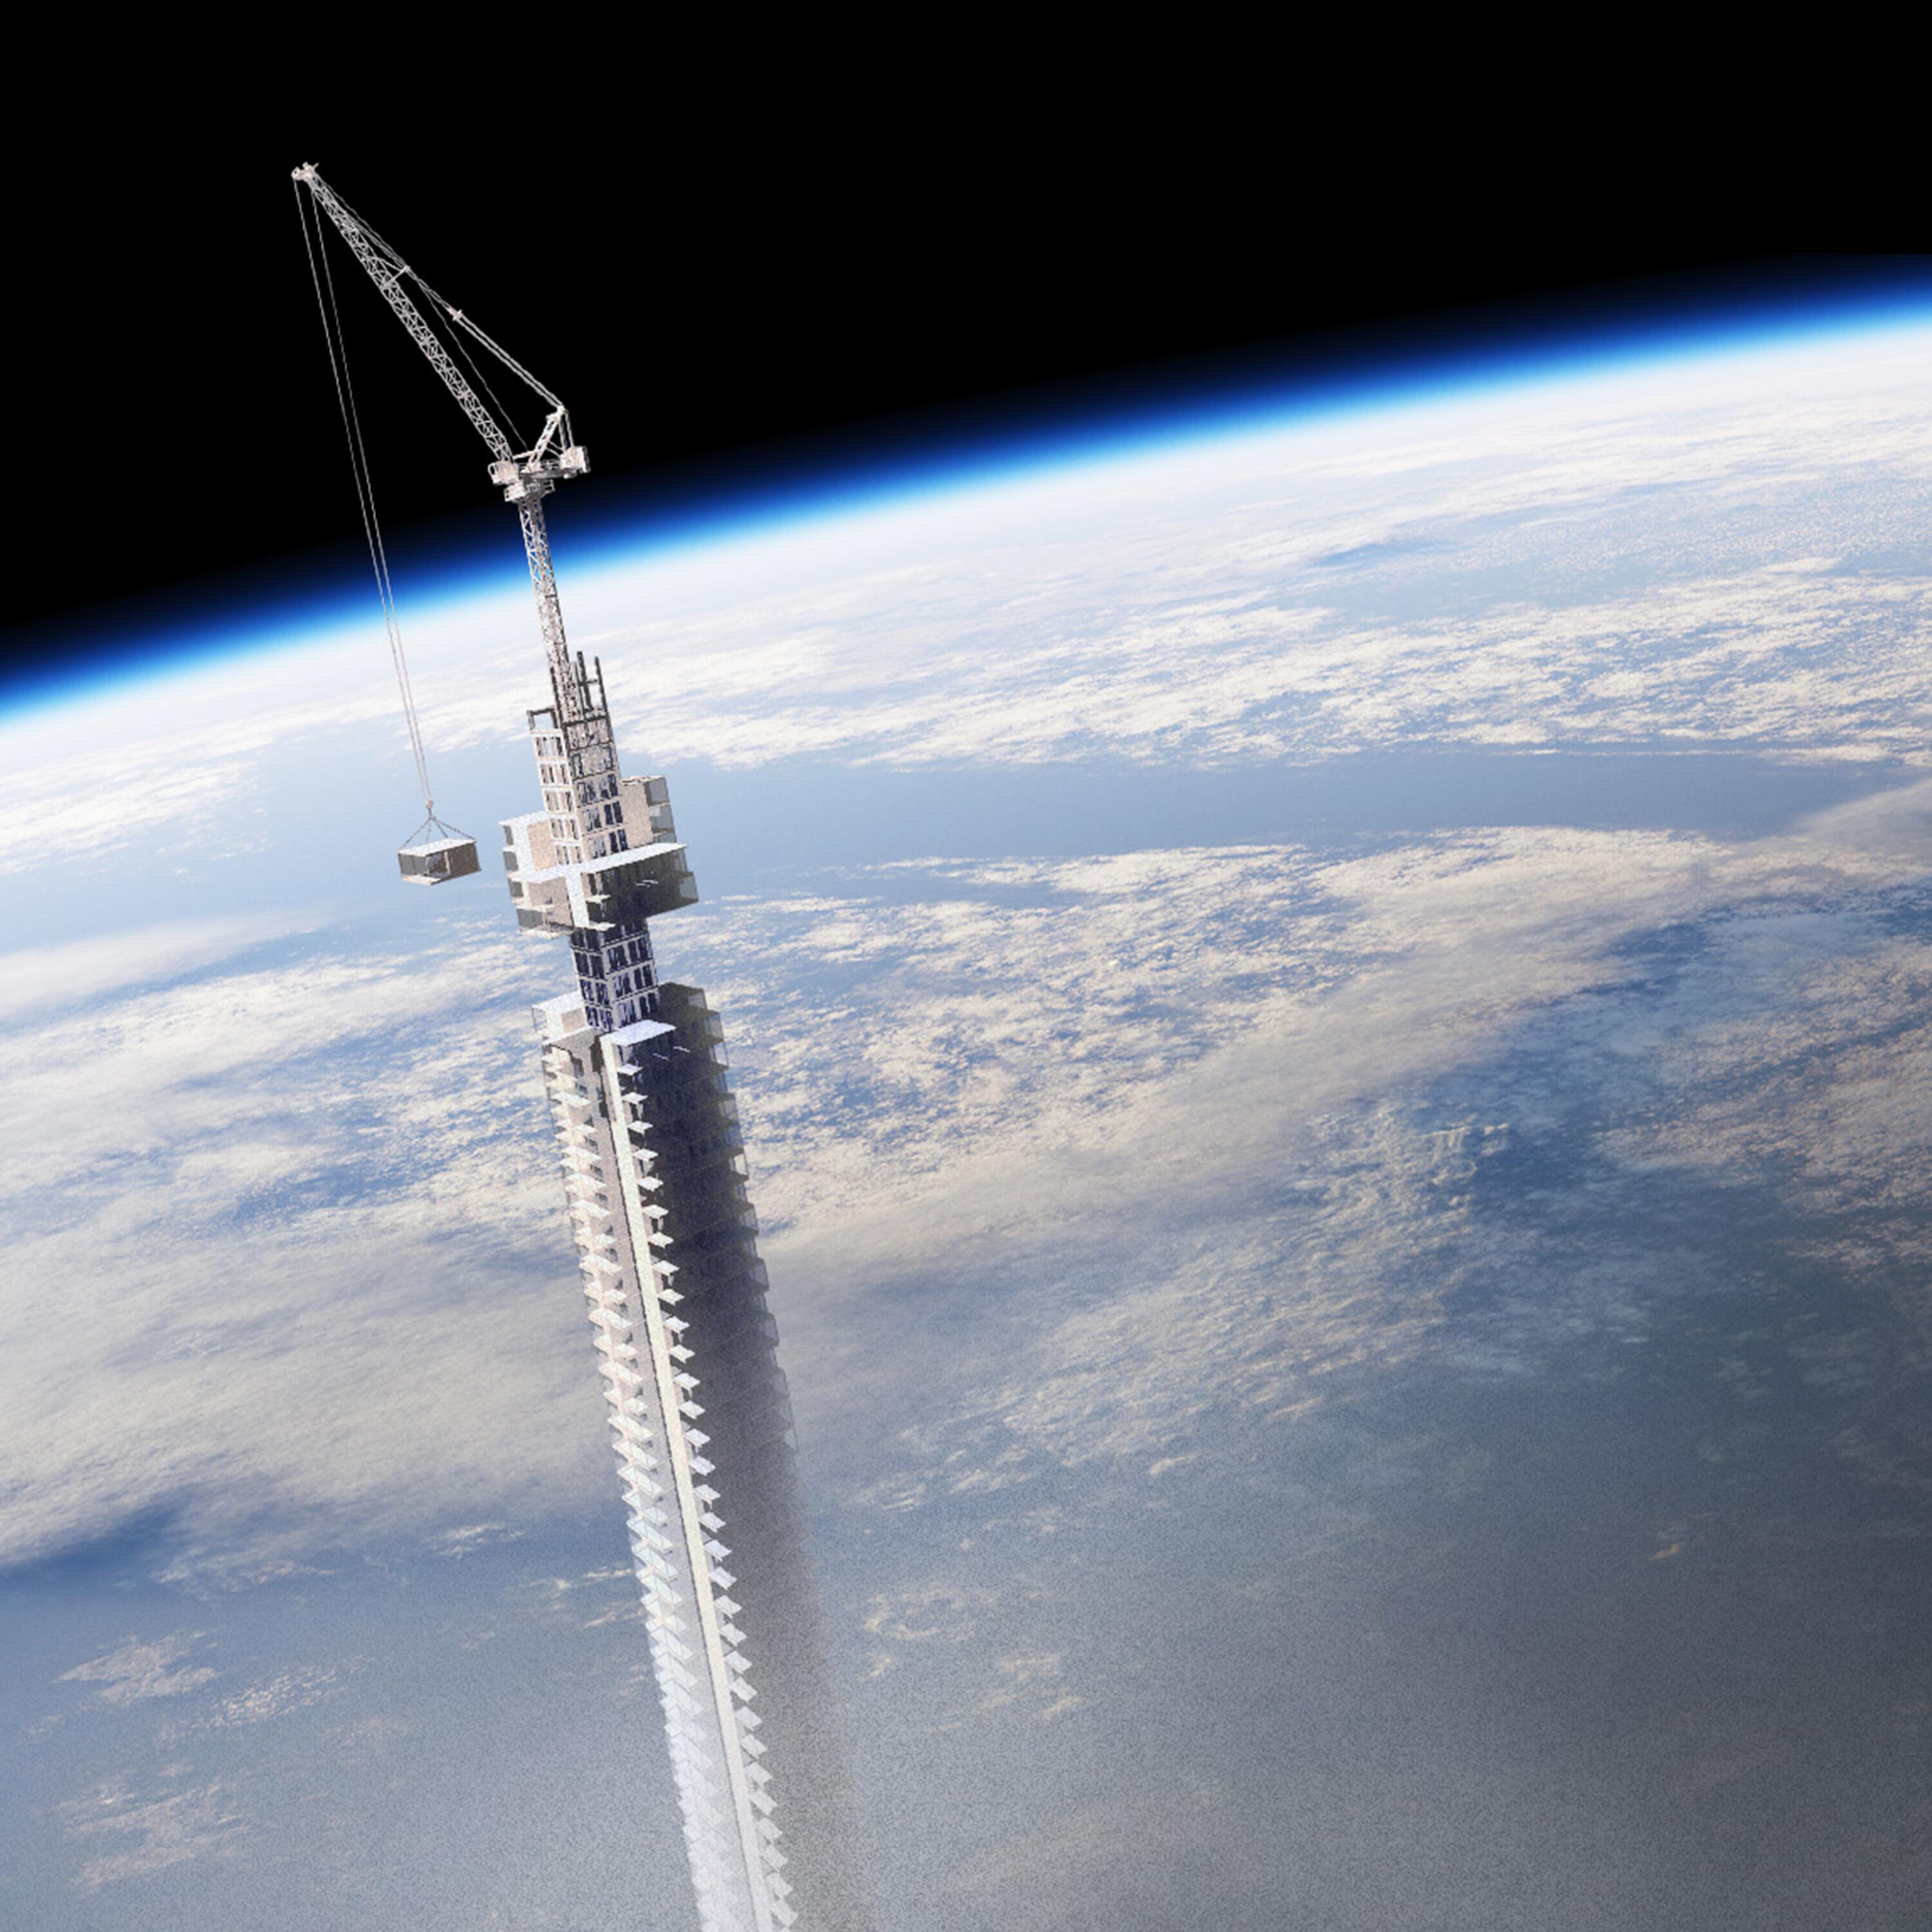 Tallest Building in the World May Be Hanged from an Asteroid